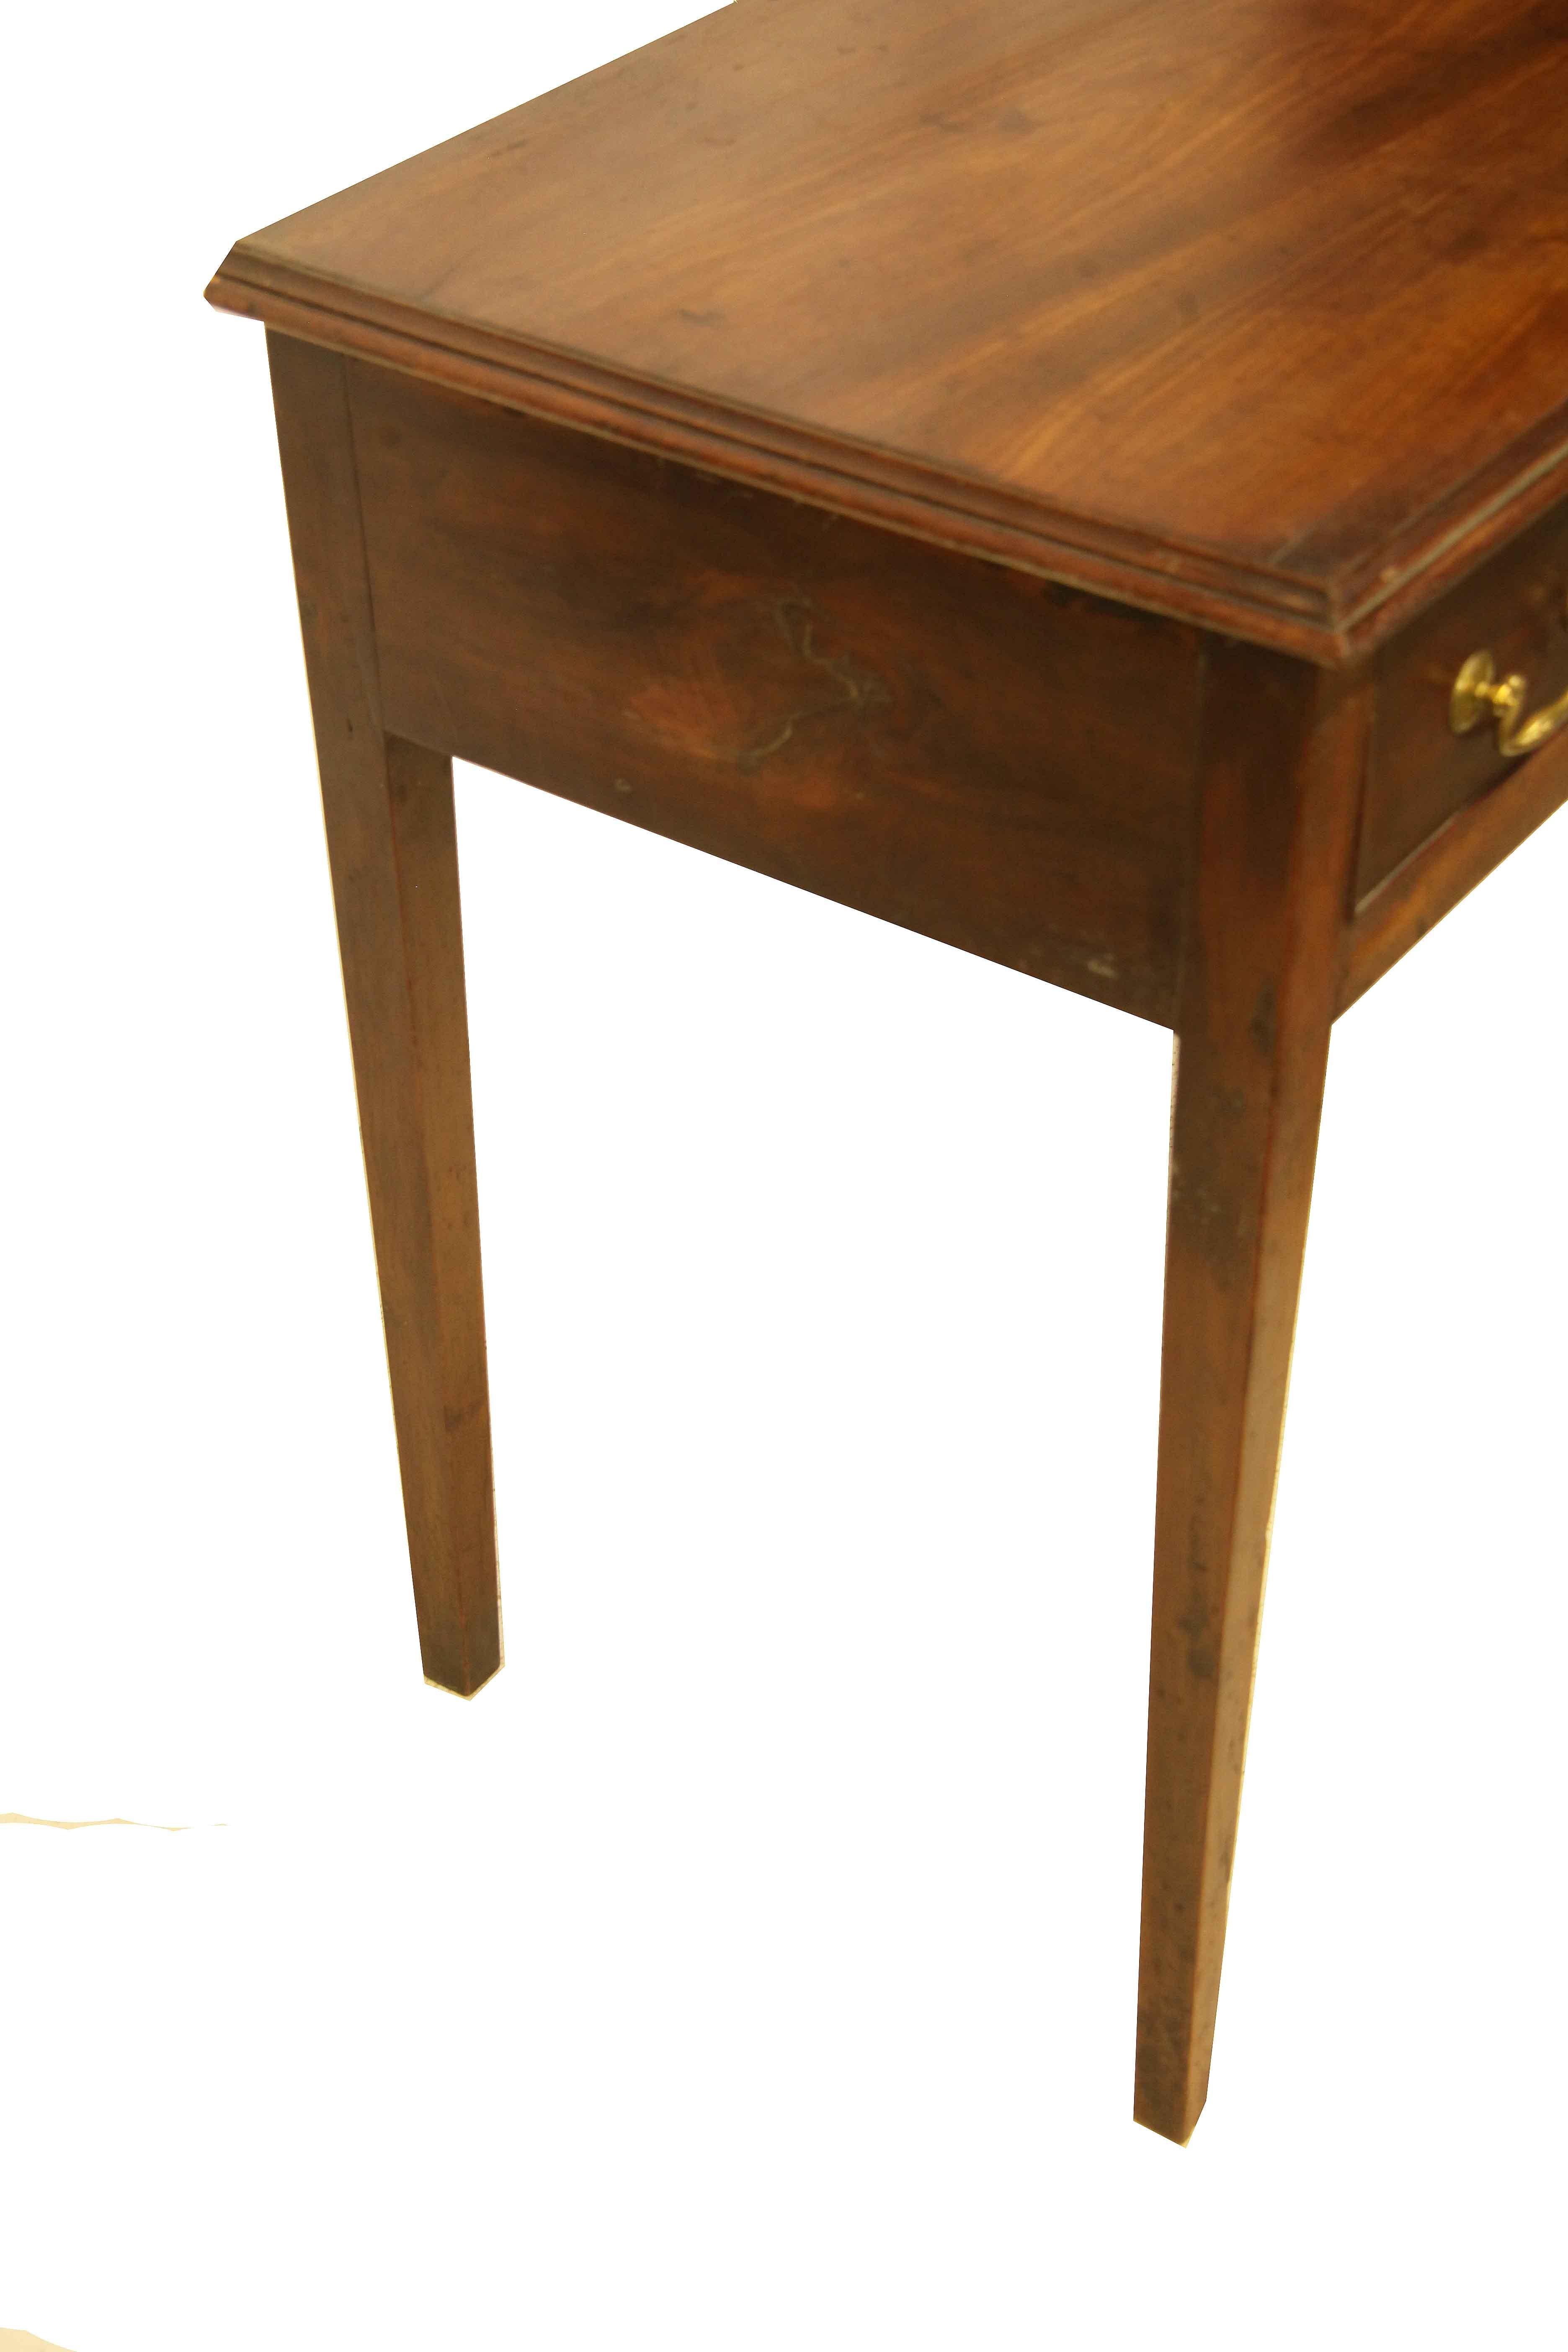 George III end table, the top has beautiful patina and grain with applied molding on the edge, single drawer with swan neck brass pulls, pine secondary wood. The legs are nicely tapered. This early 19th century table has excellent weight for its